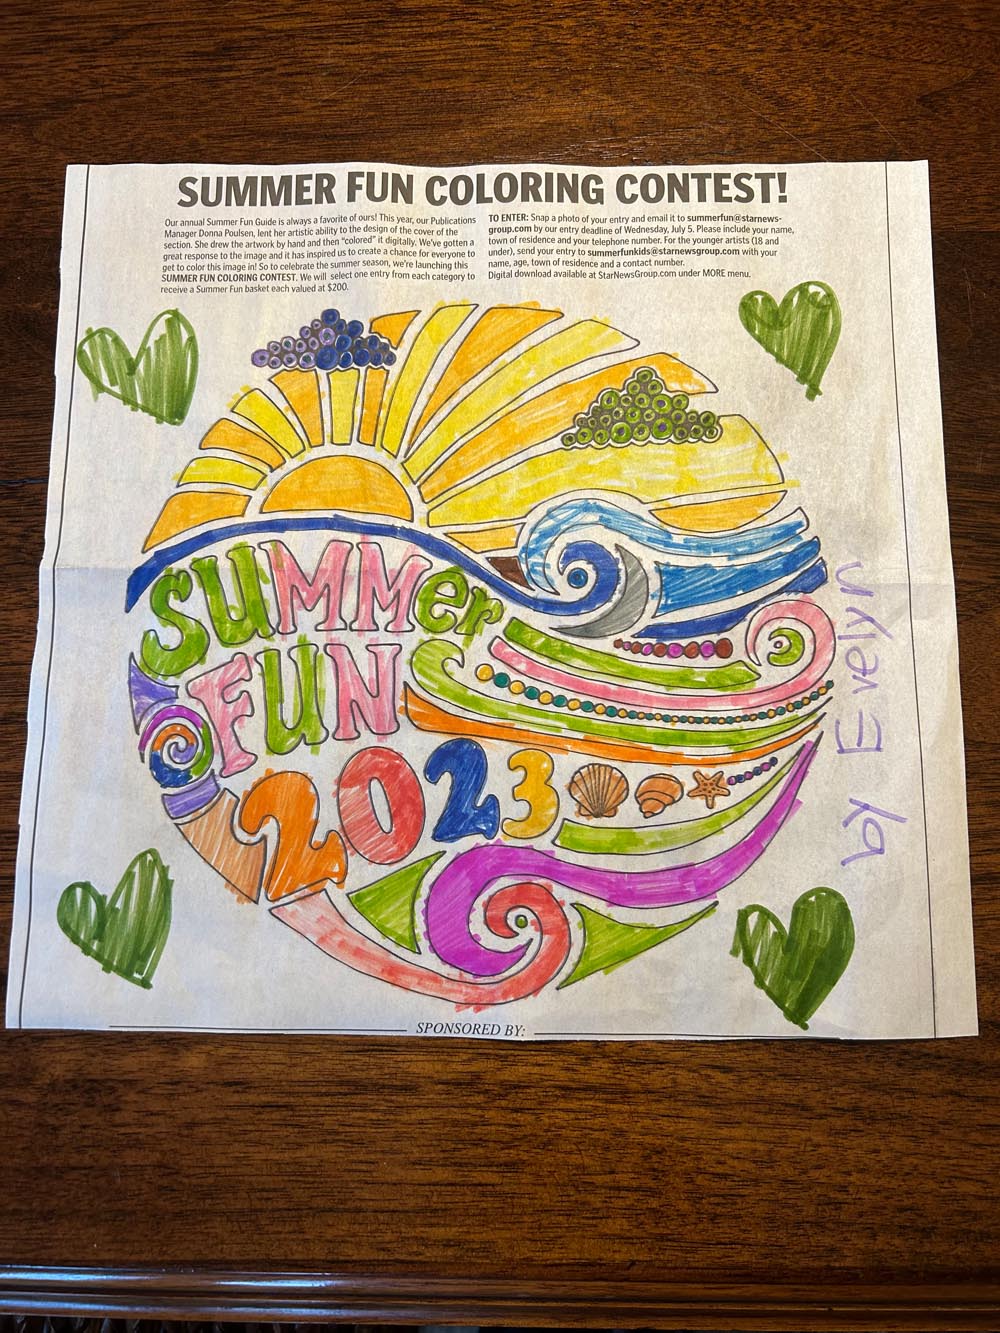 Kid's Coloring Contest